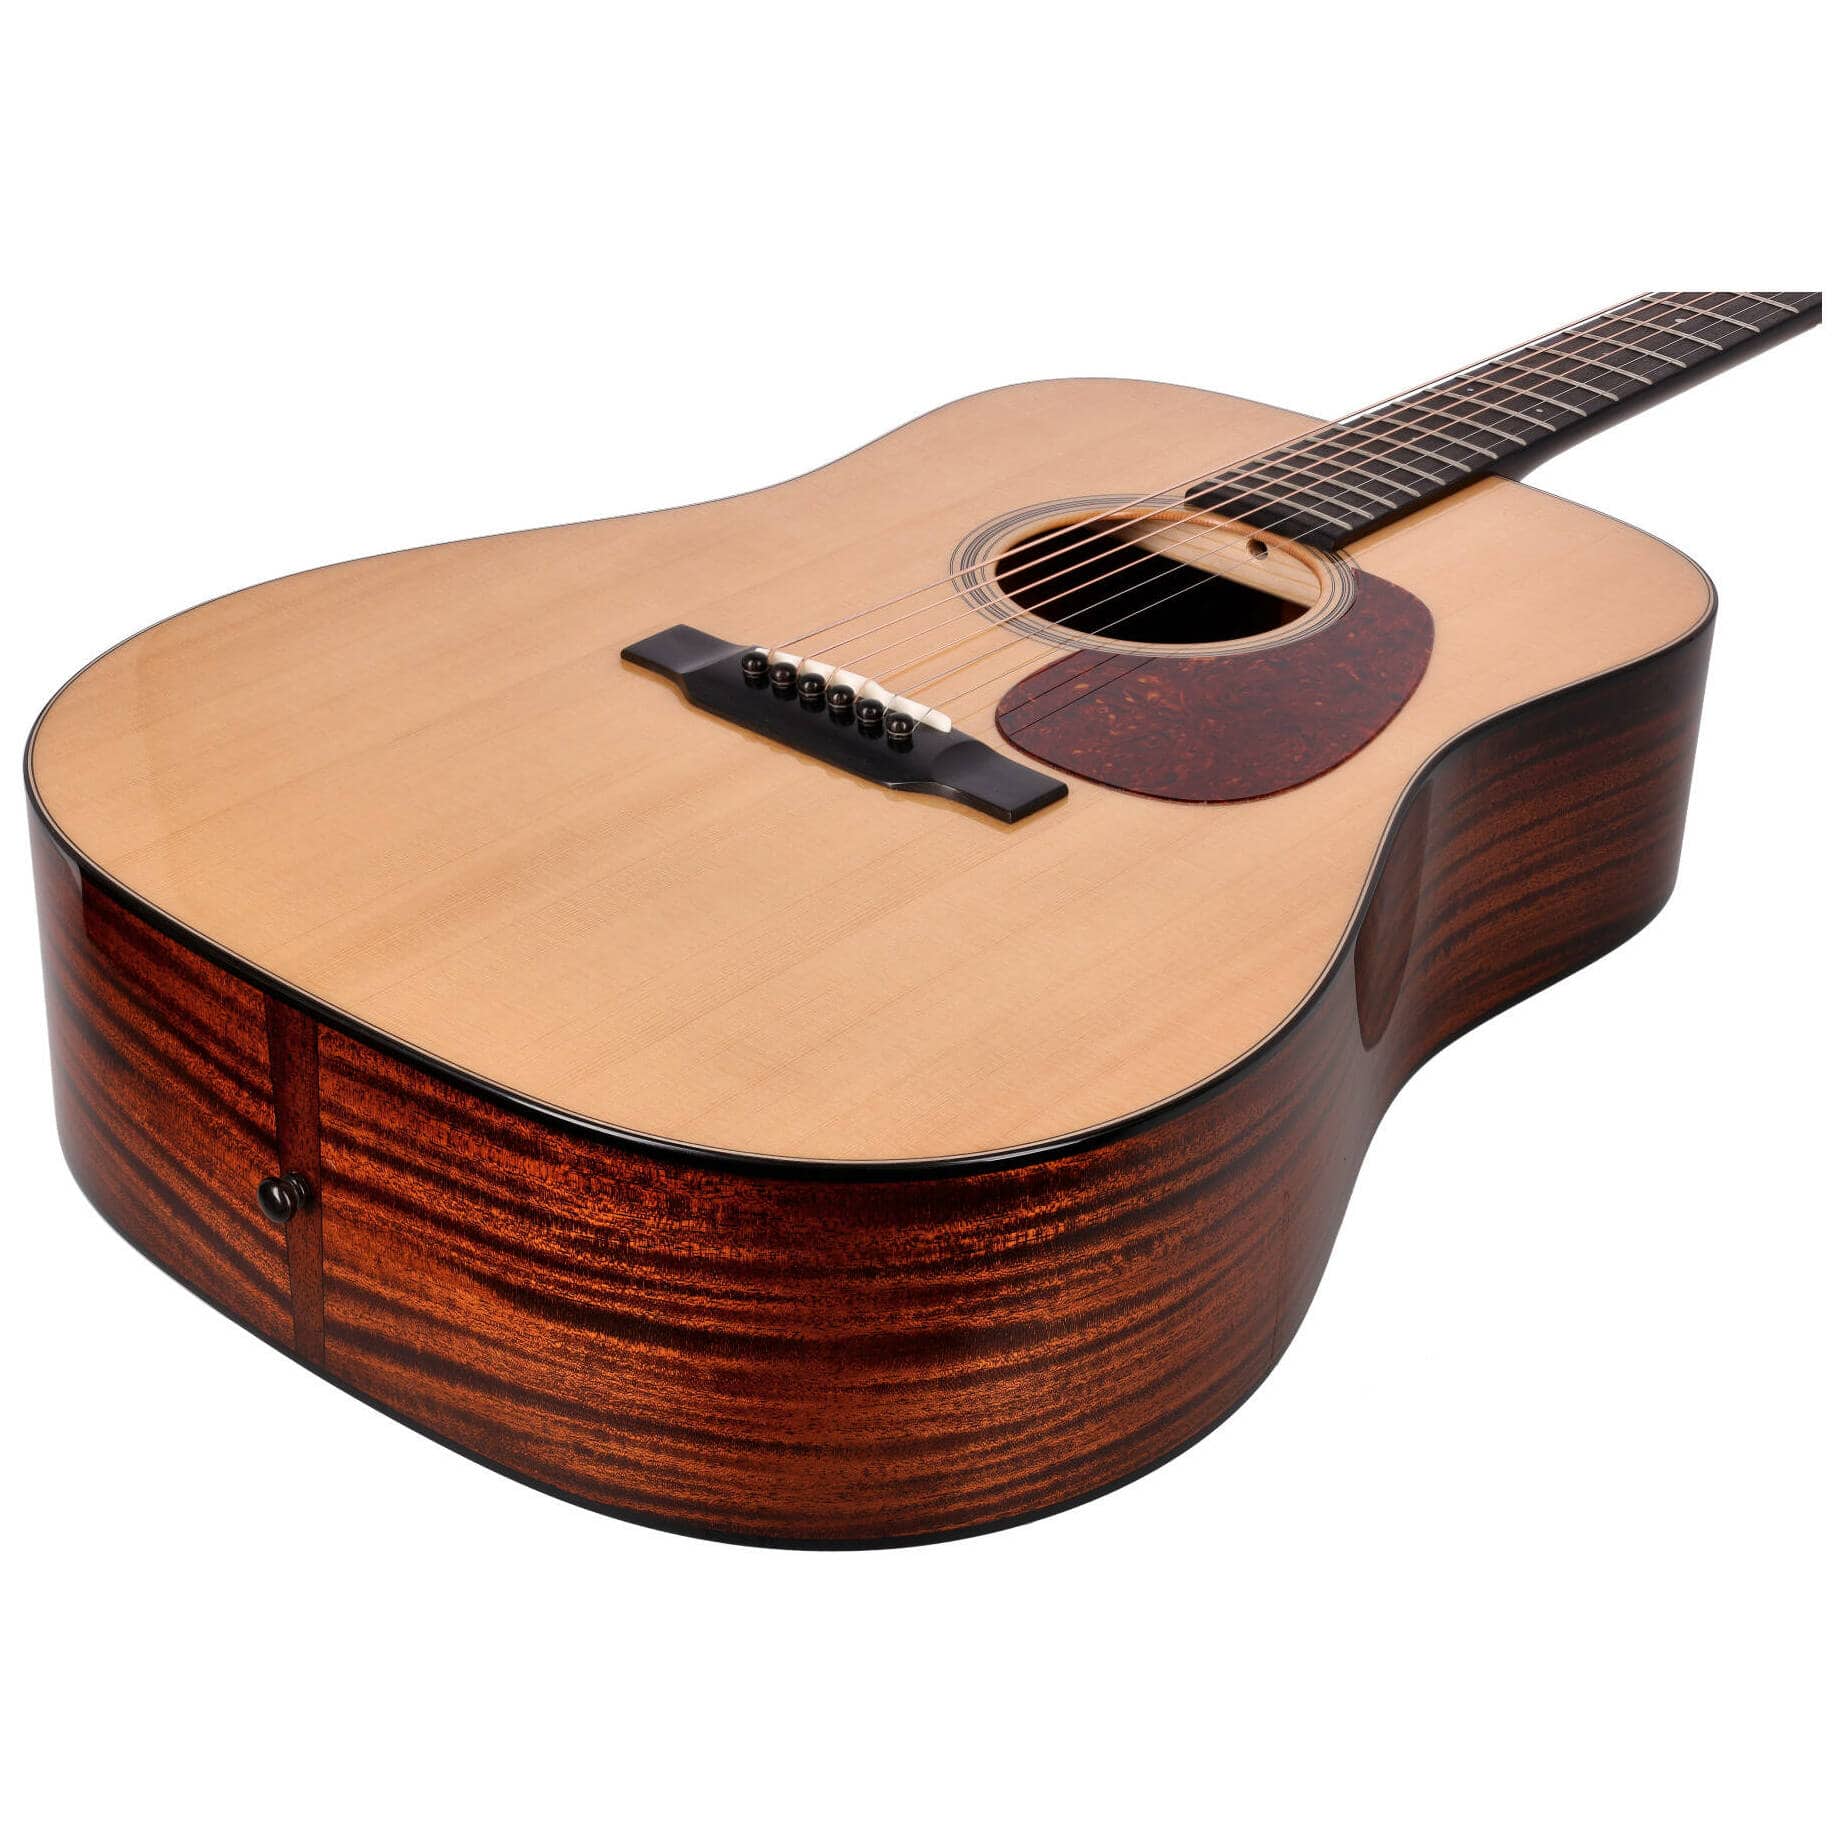 Bourgeois Guitars D CountryBoy Touchstone 8